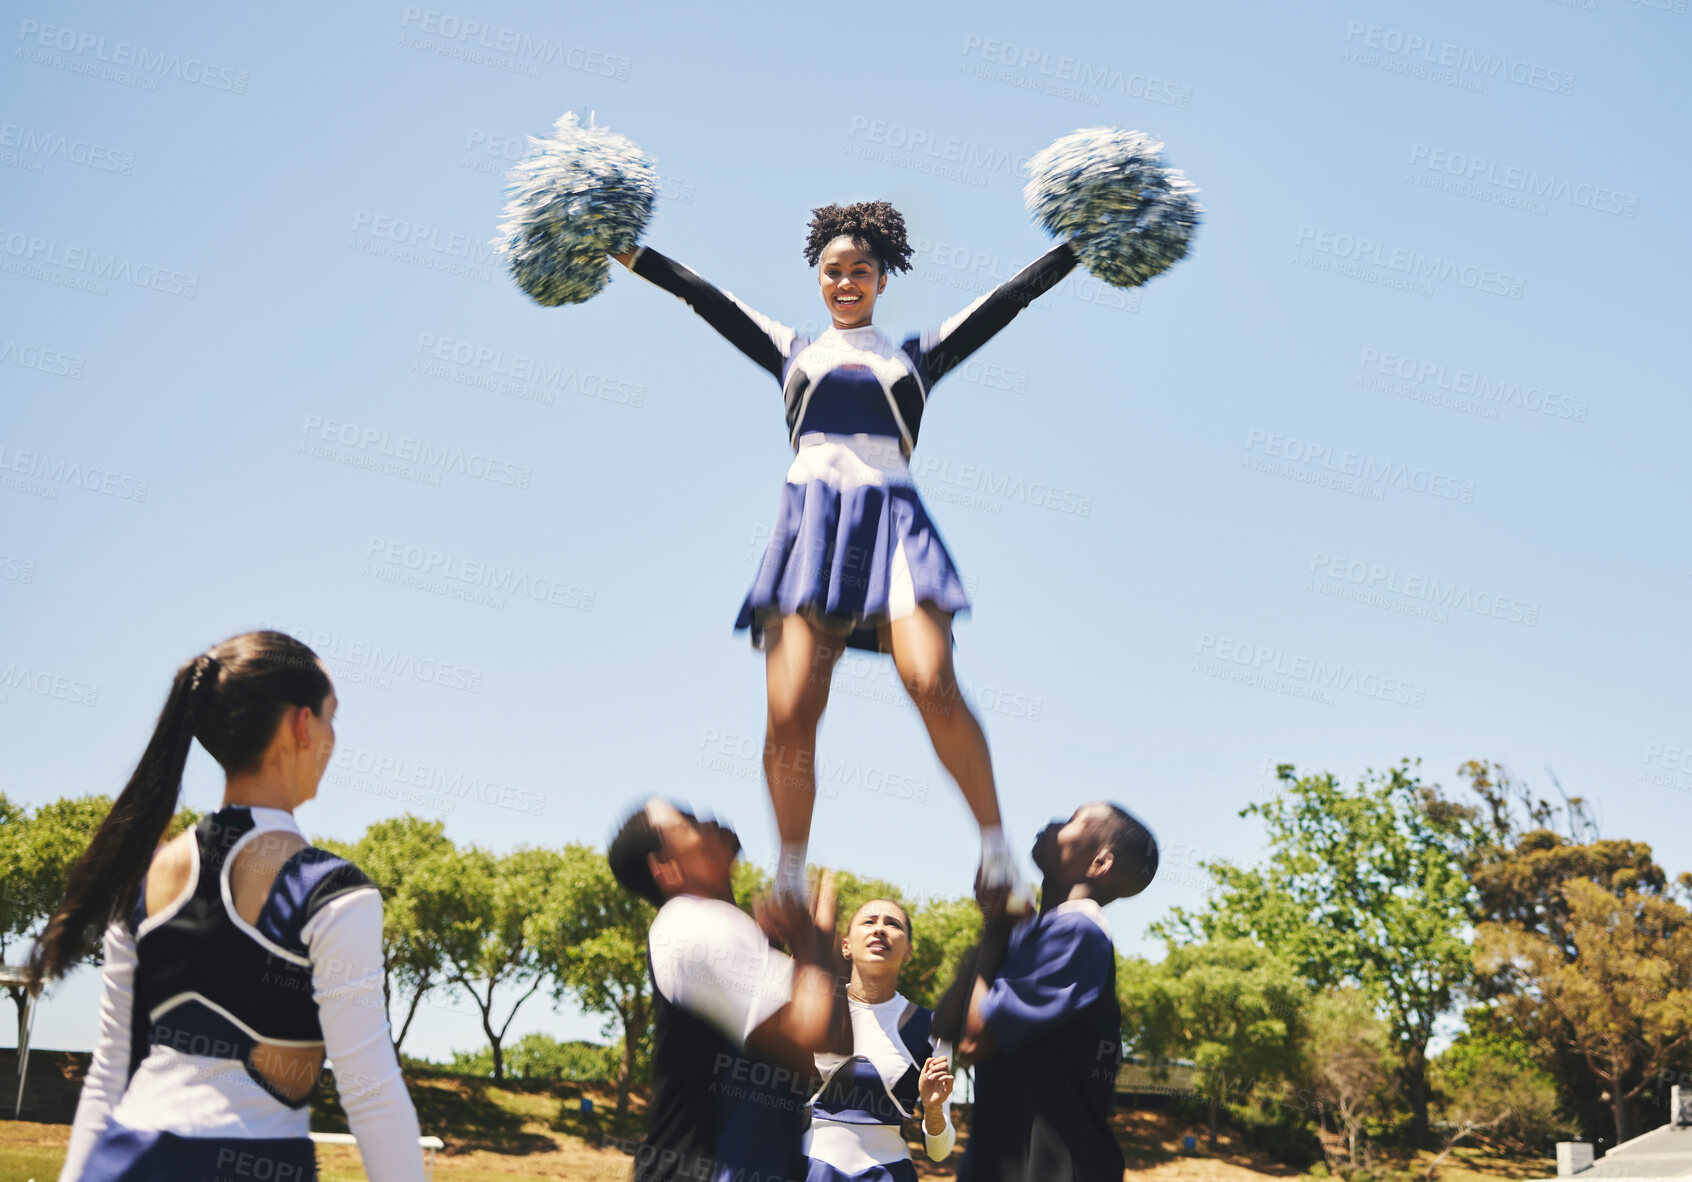 Buy stock photo Teamwork, motivation or cheerleader in air with people outdoor in training routine or sports event. Jump, sky or girl by a happy cheer squad group on a field together for support, exercise or fitness